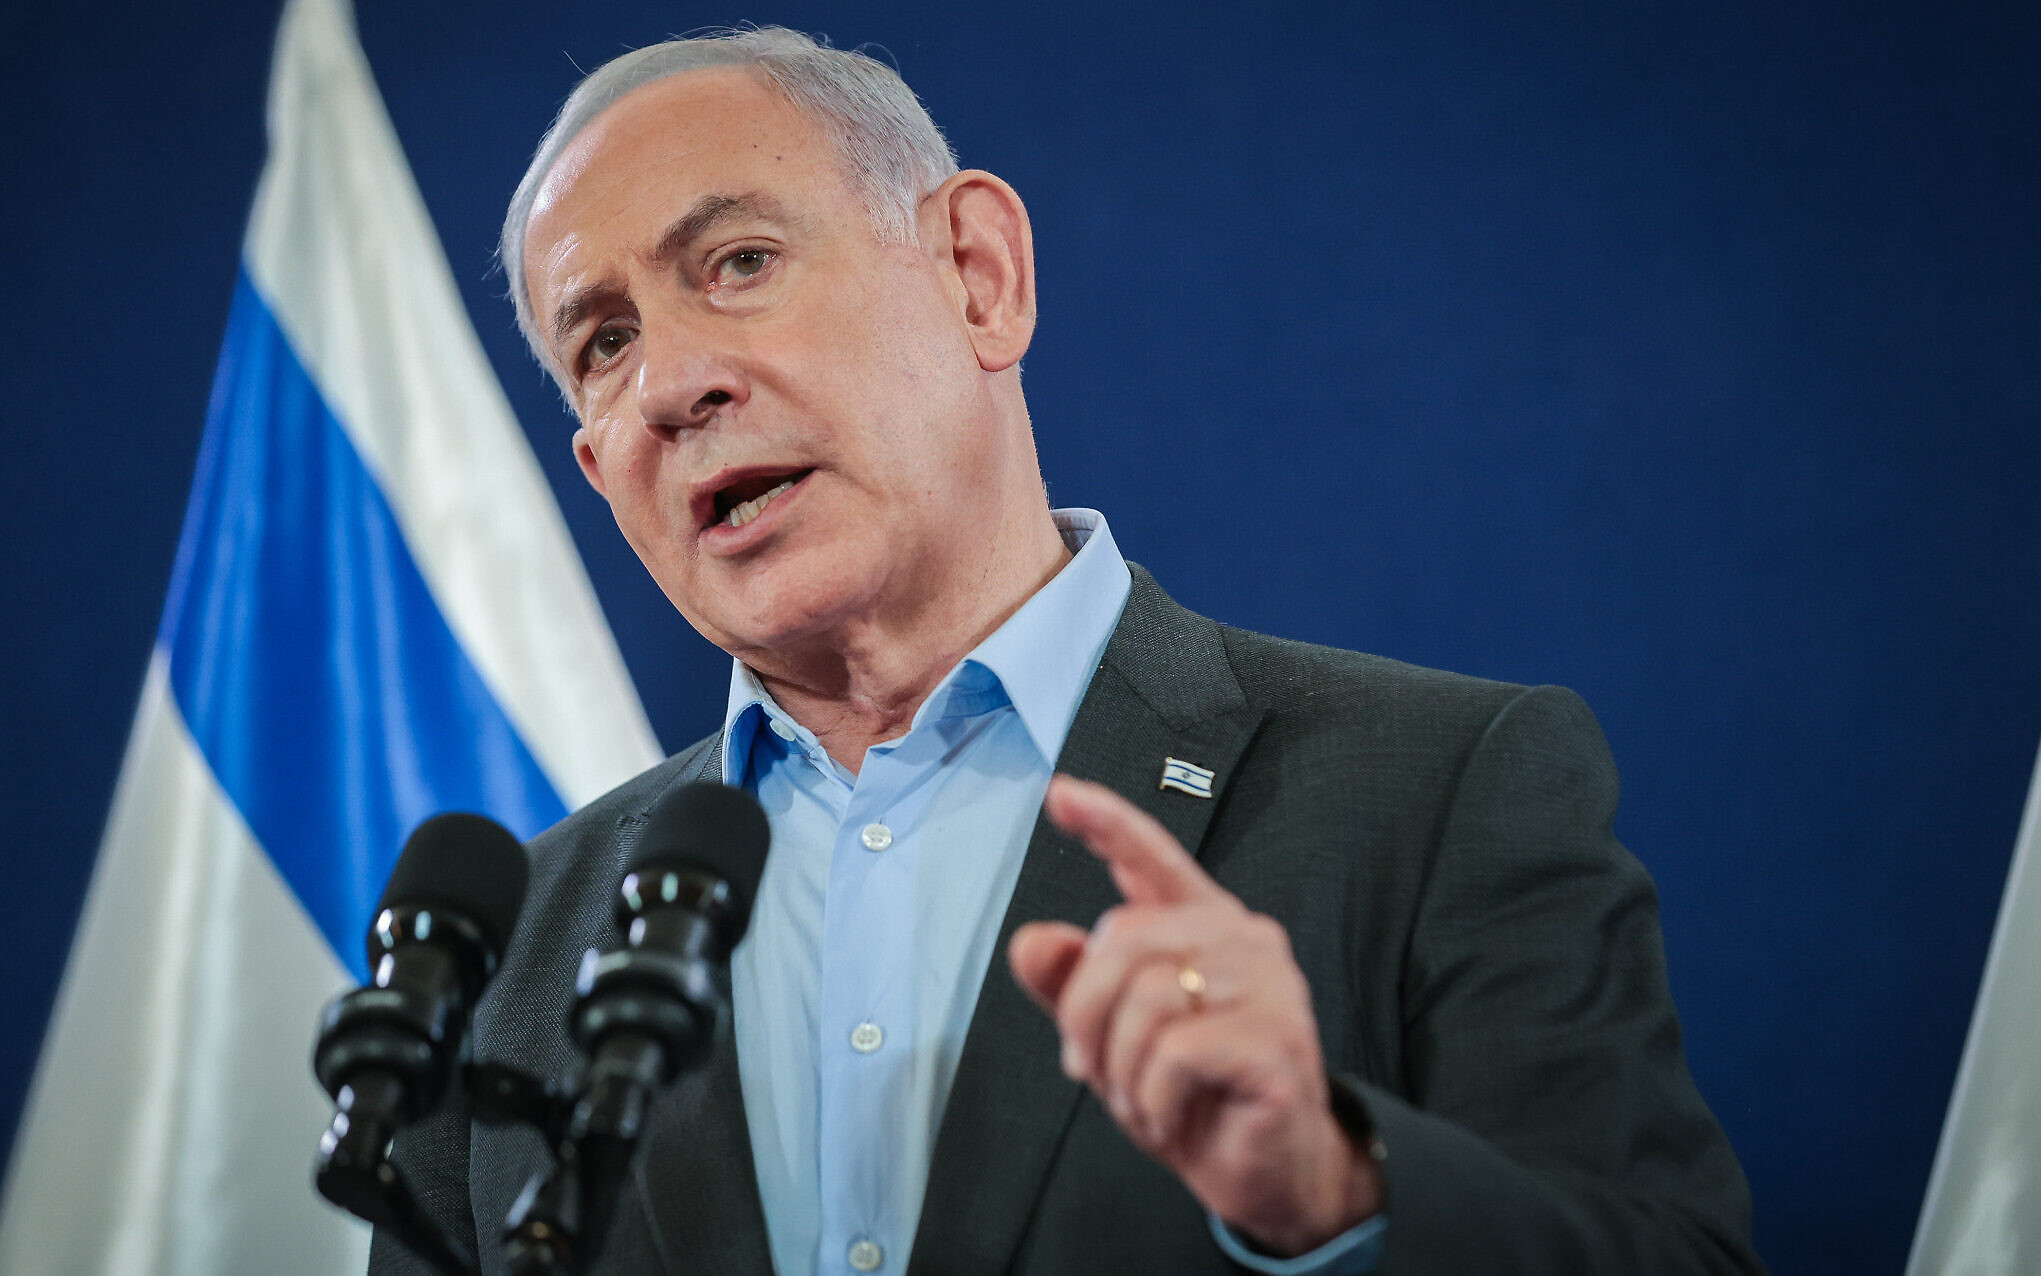 Netanyahu outlined the conditions for peace in the Gaza Strip